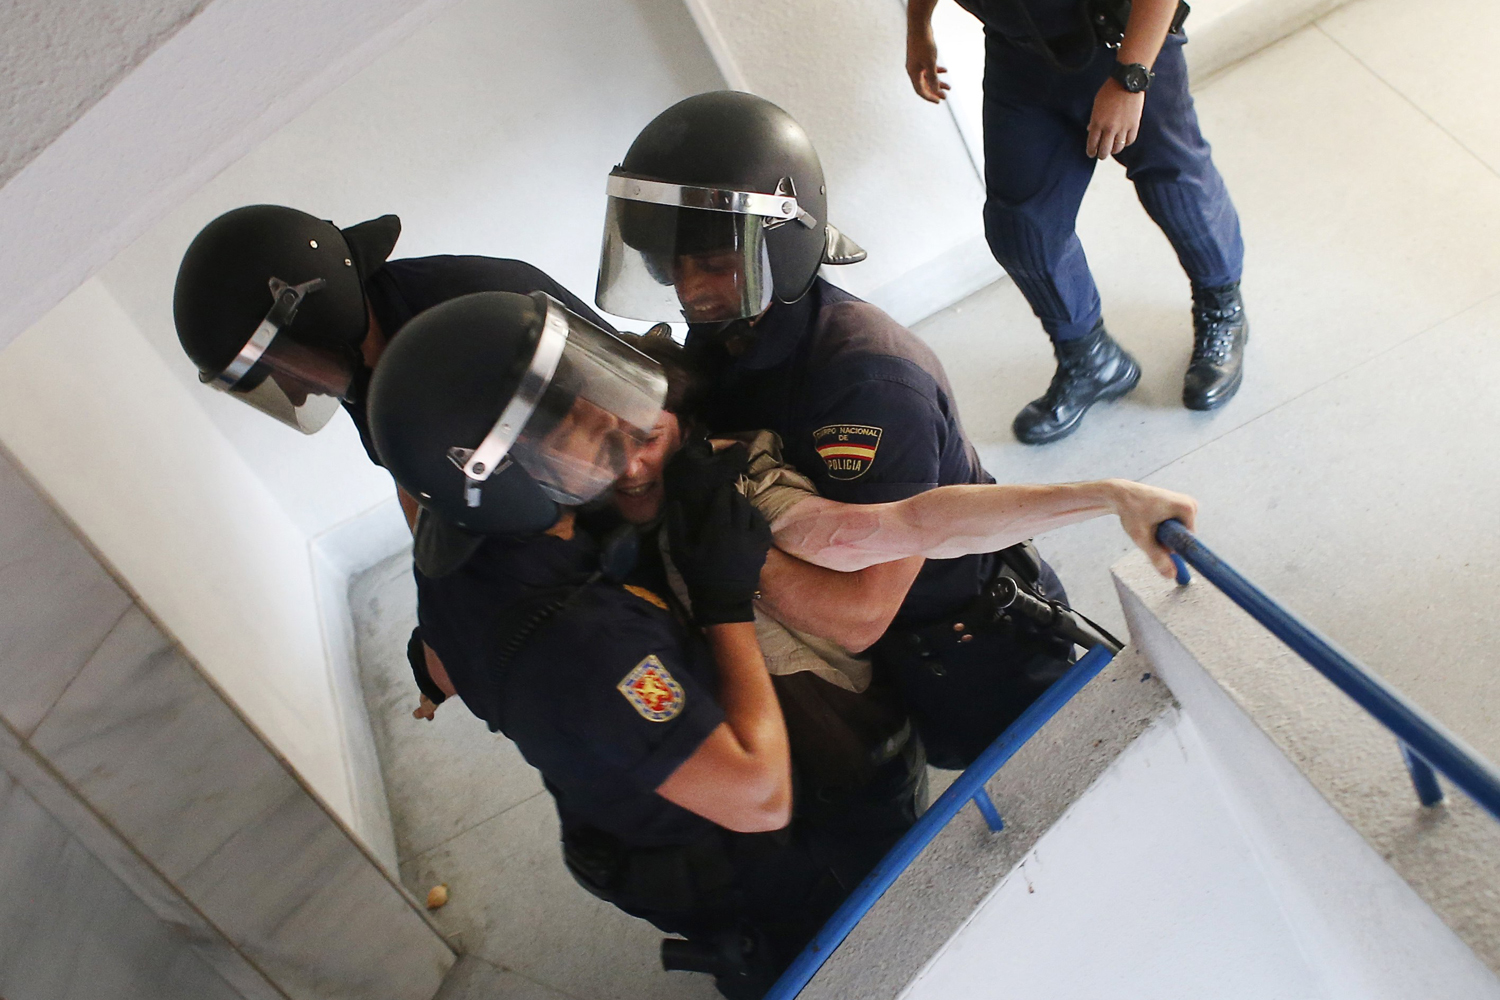 Spanish riot police drag an anti-eviction activist down a staircase during the eviction of Susana Santiago Montoya and her family in Madrid